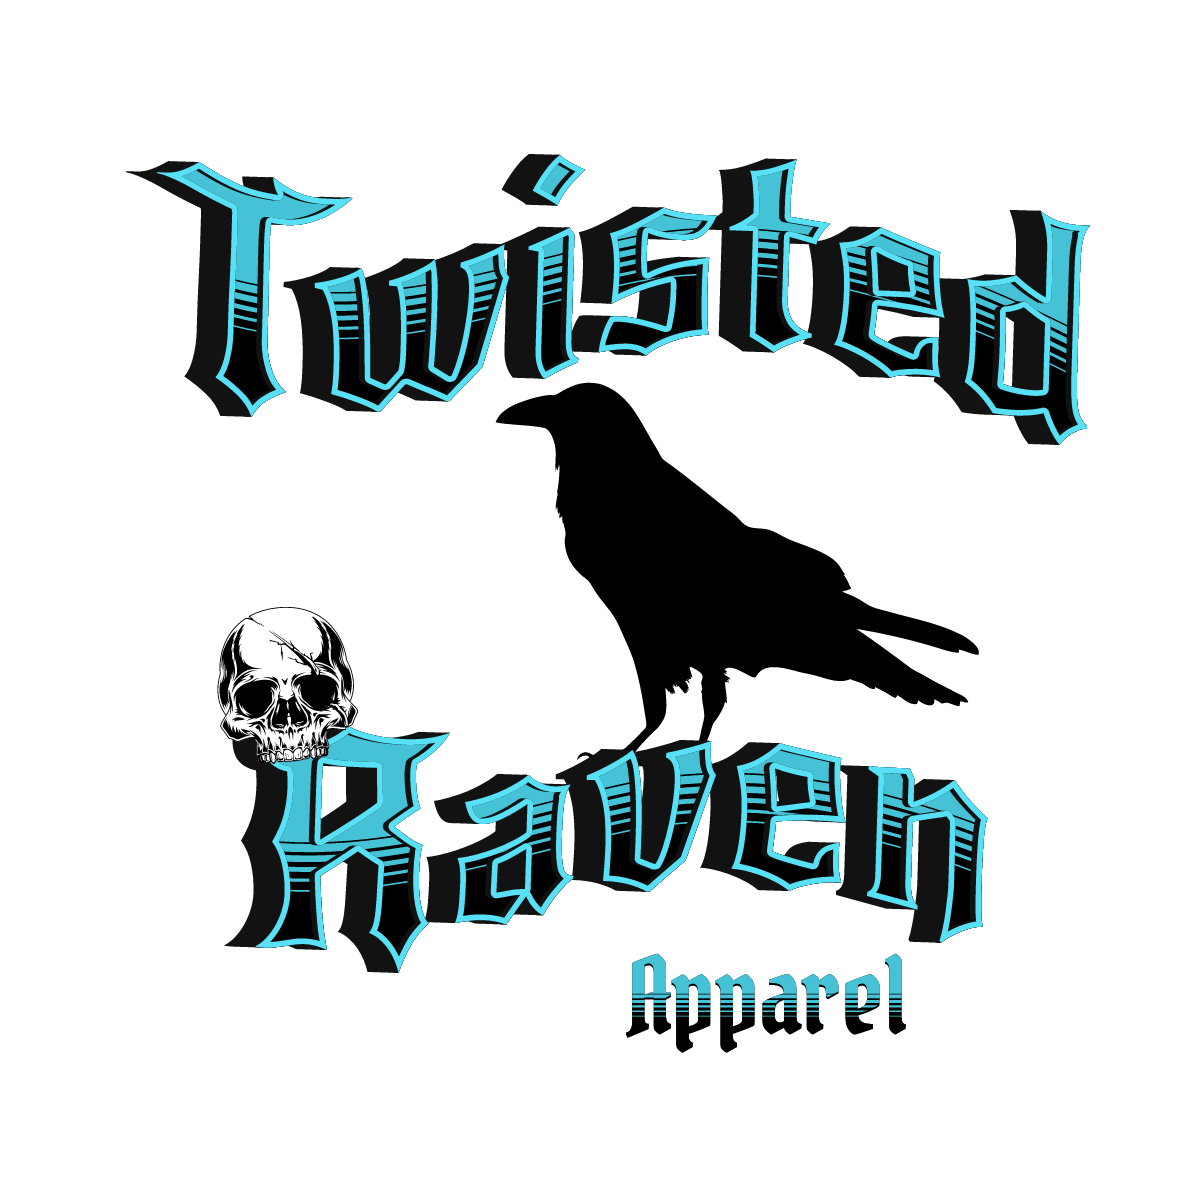 Twisted Raven Apparel